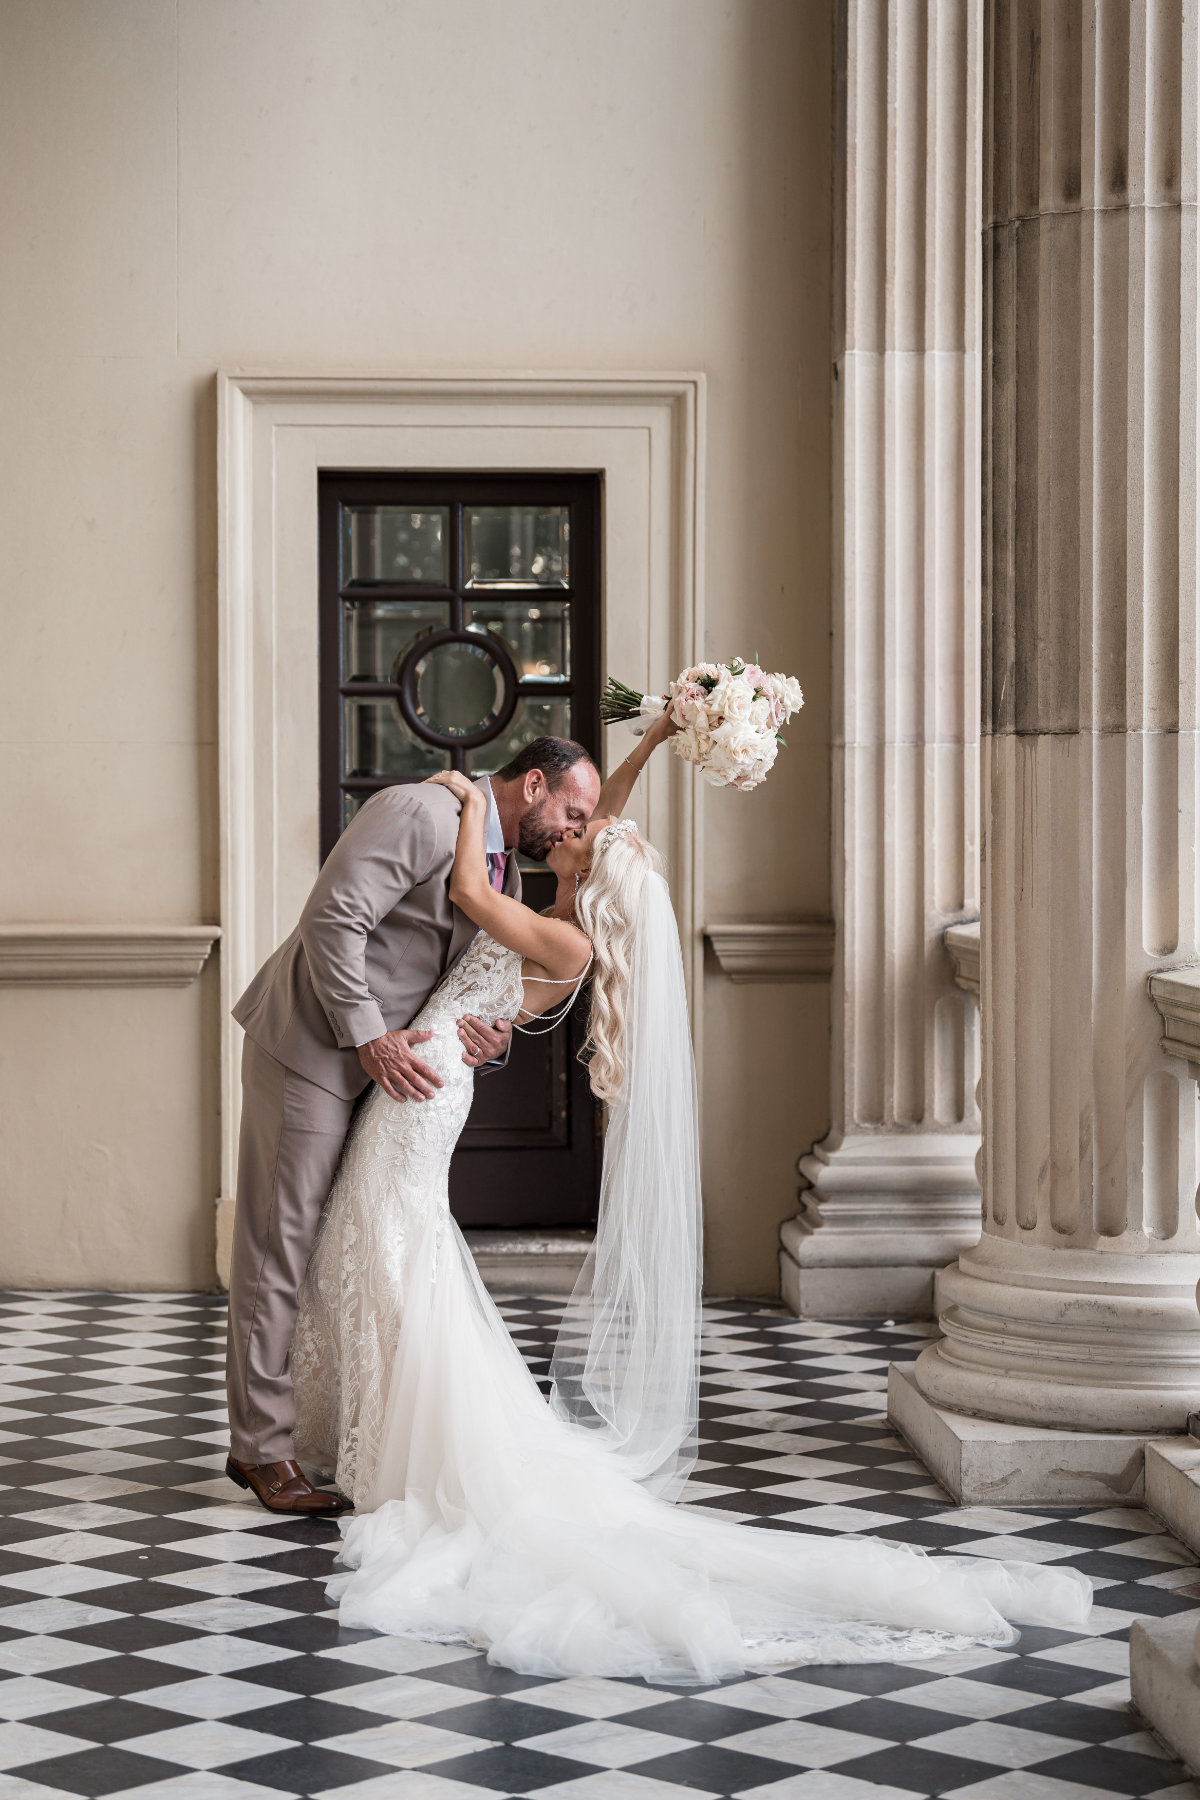 Bec and Andrew's Customs House Brisbane wedding photographed by Evernew Studio